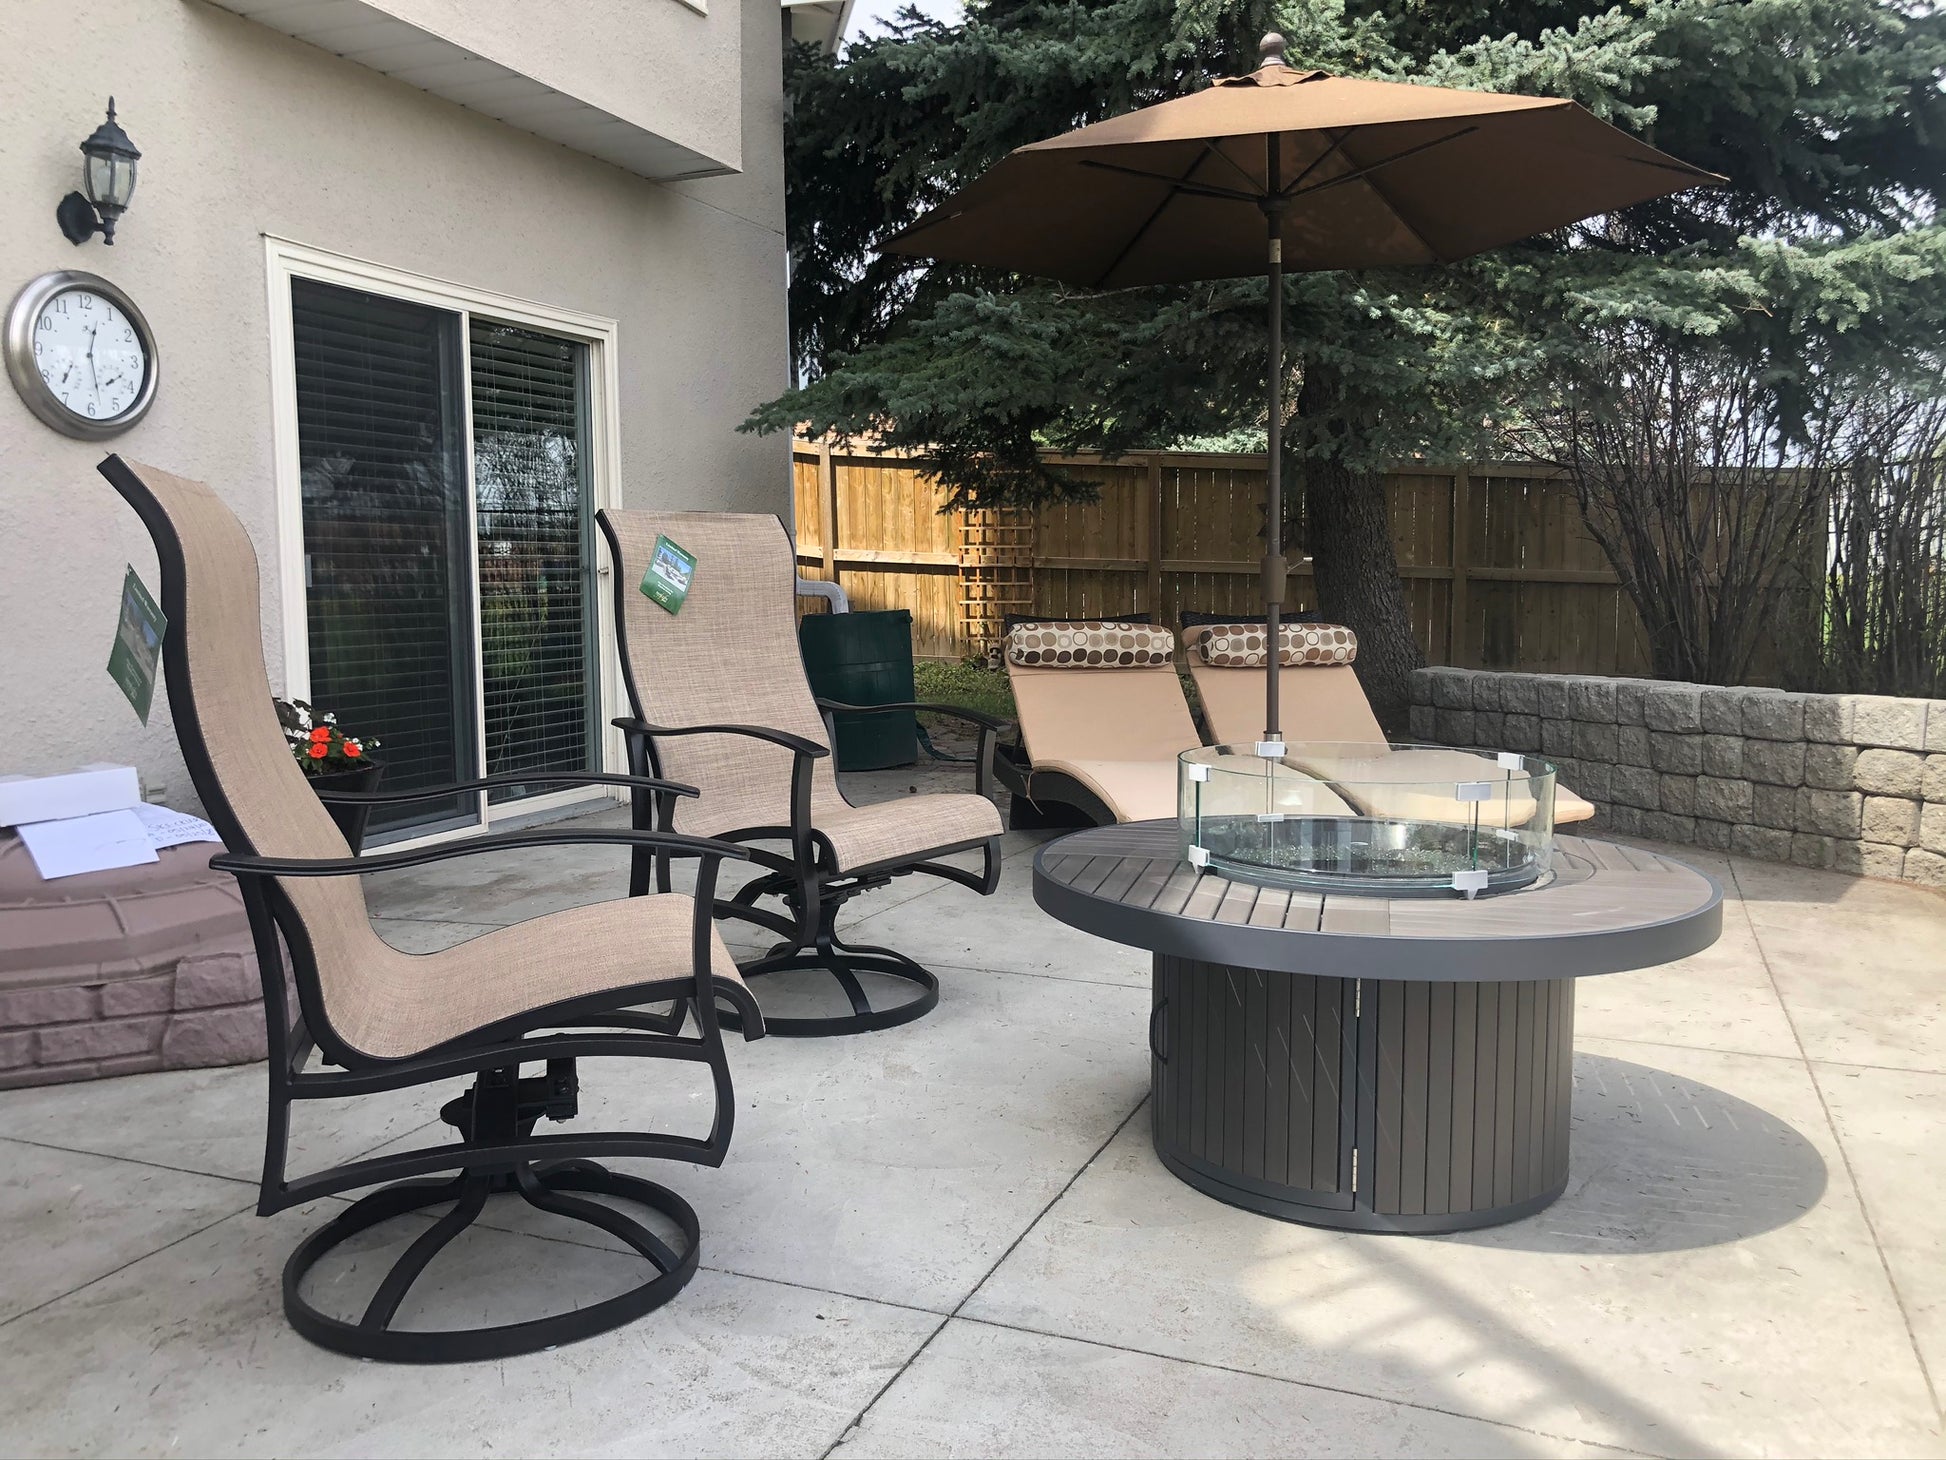 The lovely Outdoor GreatRoom Brooks Round Fire Table - A welcome feature to any outdoor living space.  Great for heat and ambiance. | Available at Barbecues Galore: Burlington, Oakville, Etobicoke & Calgary